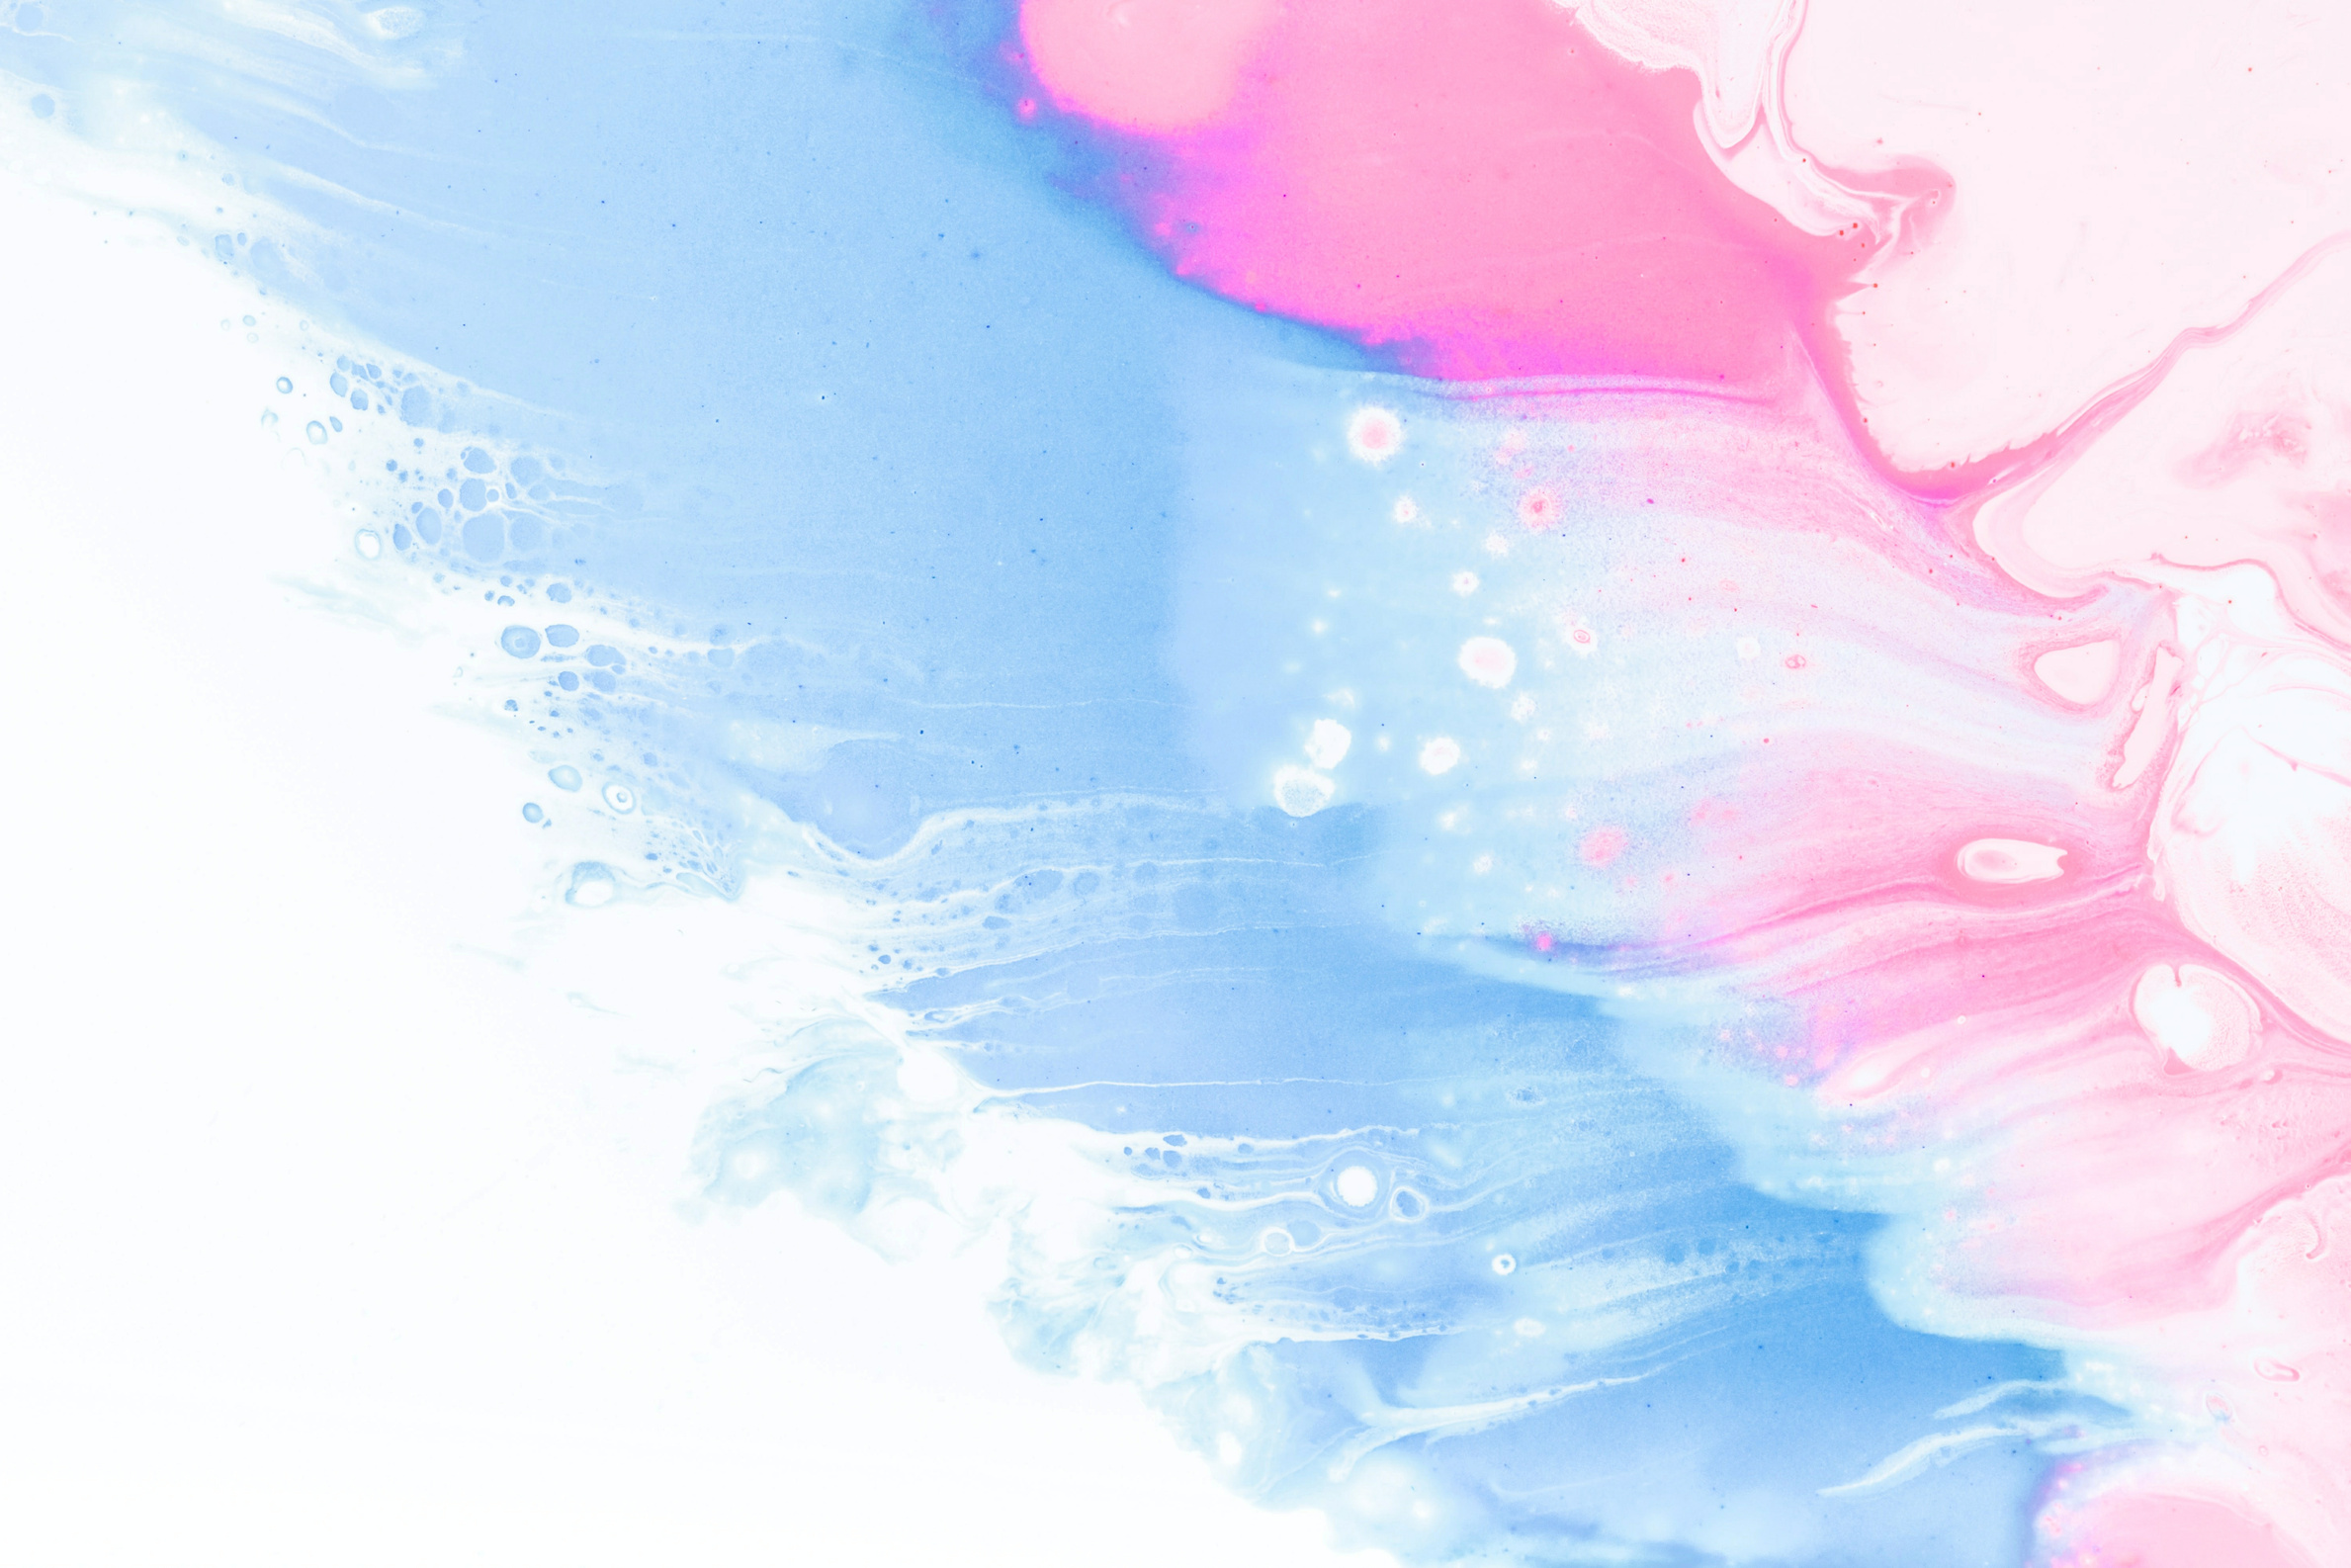 White, Blue, and Pink Fluid Art